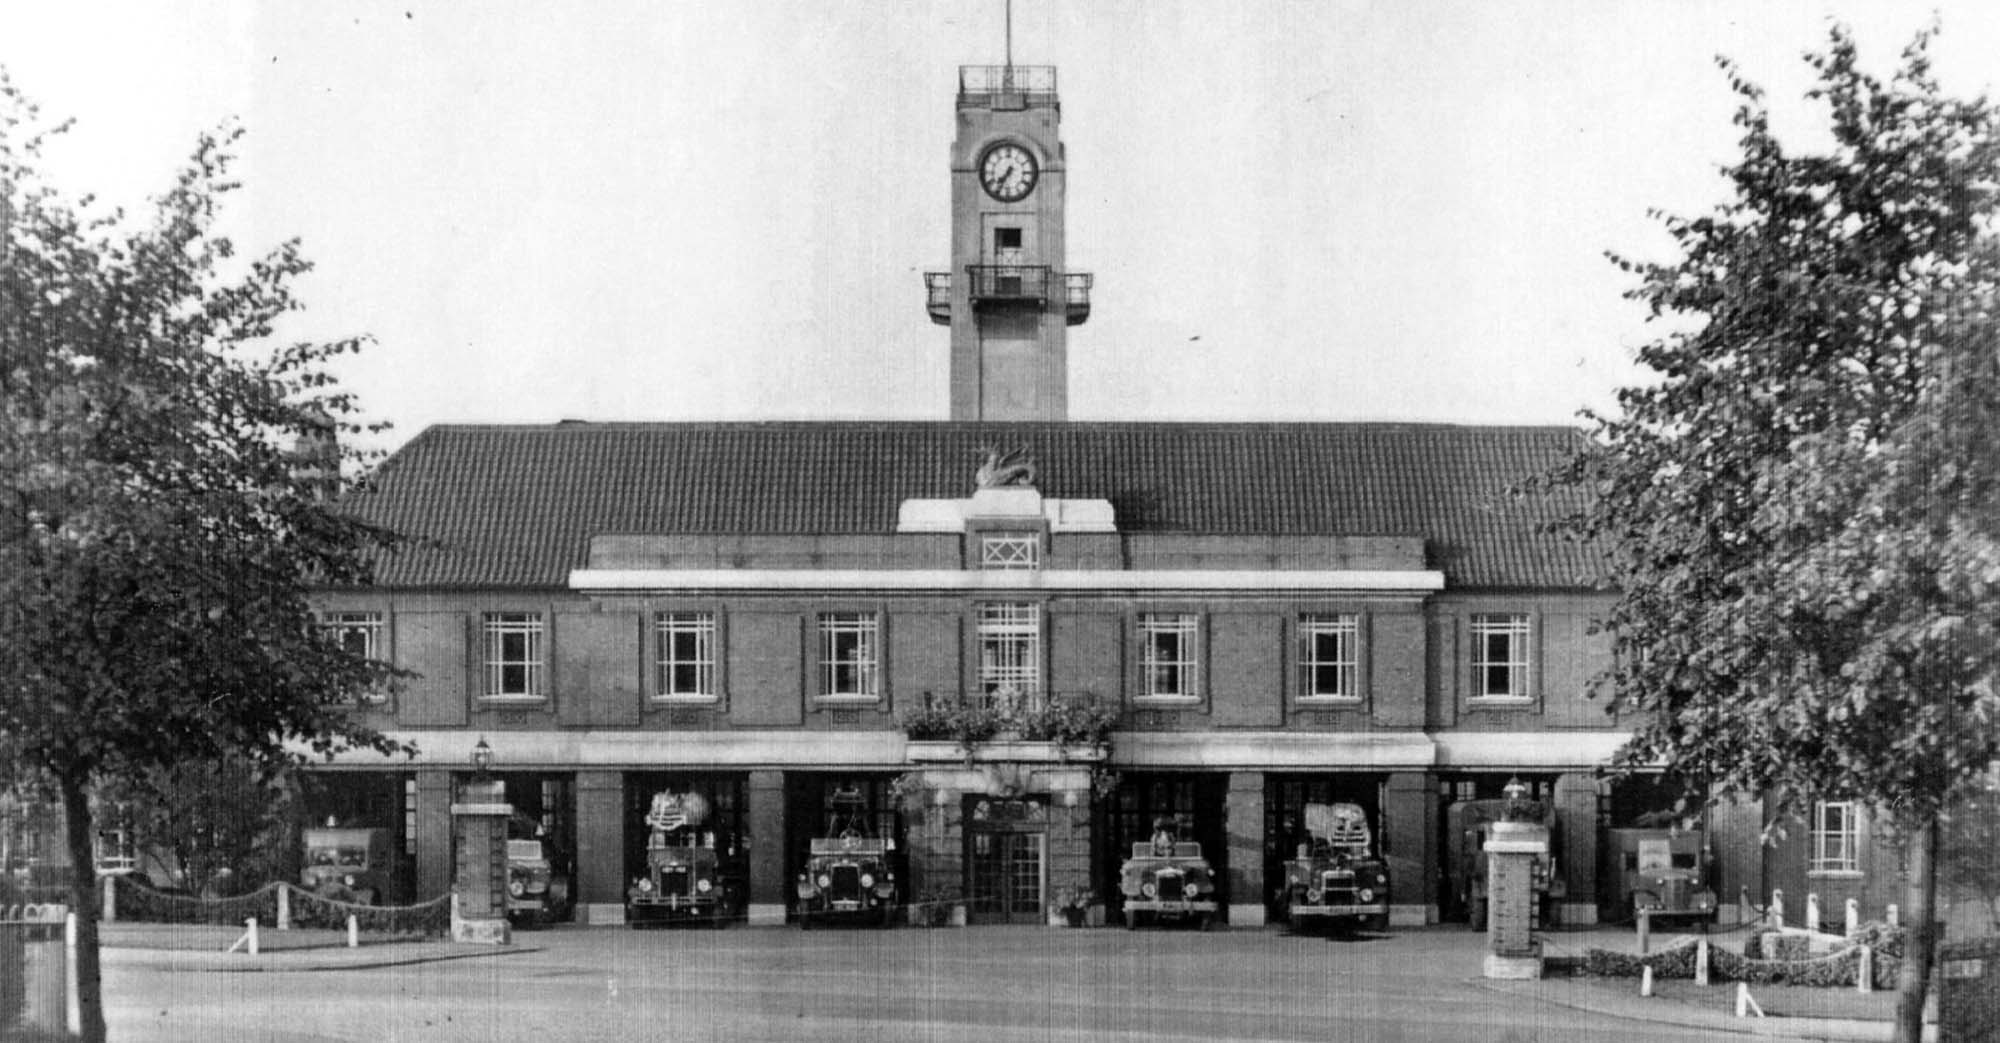 Central Station in the early 1940s with many open cab engines and special wartime vehicles in the far bays either side - Malc Tovey